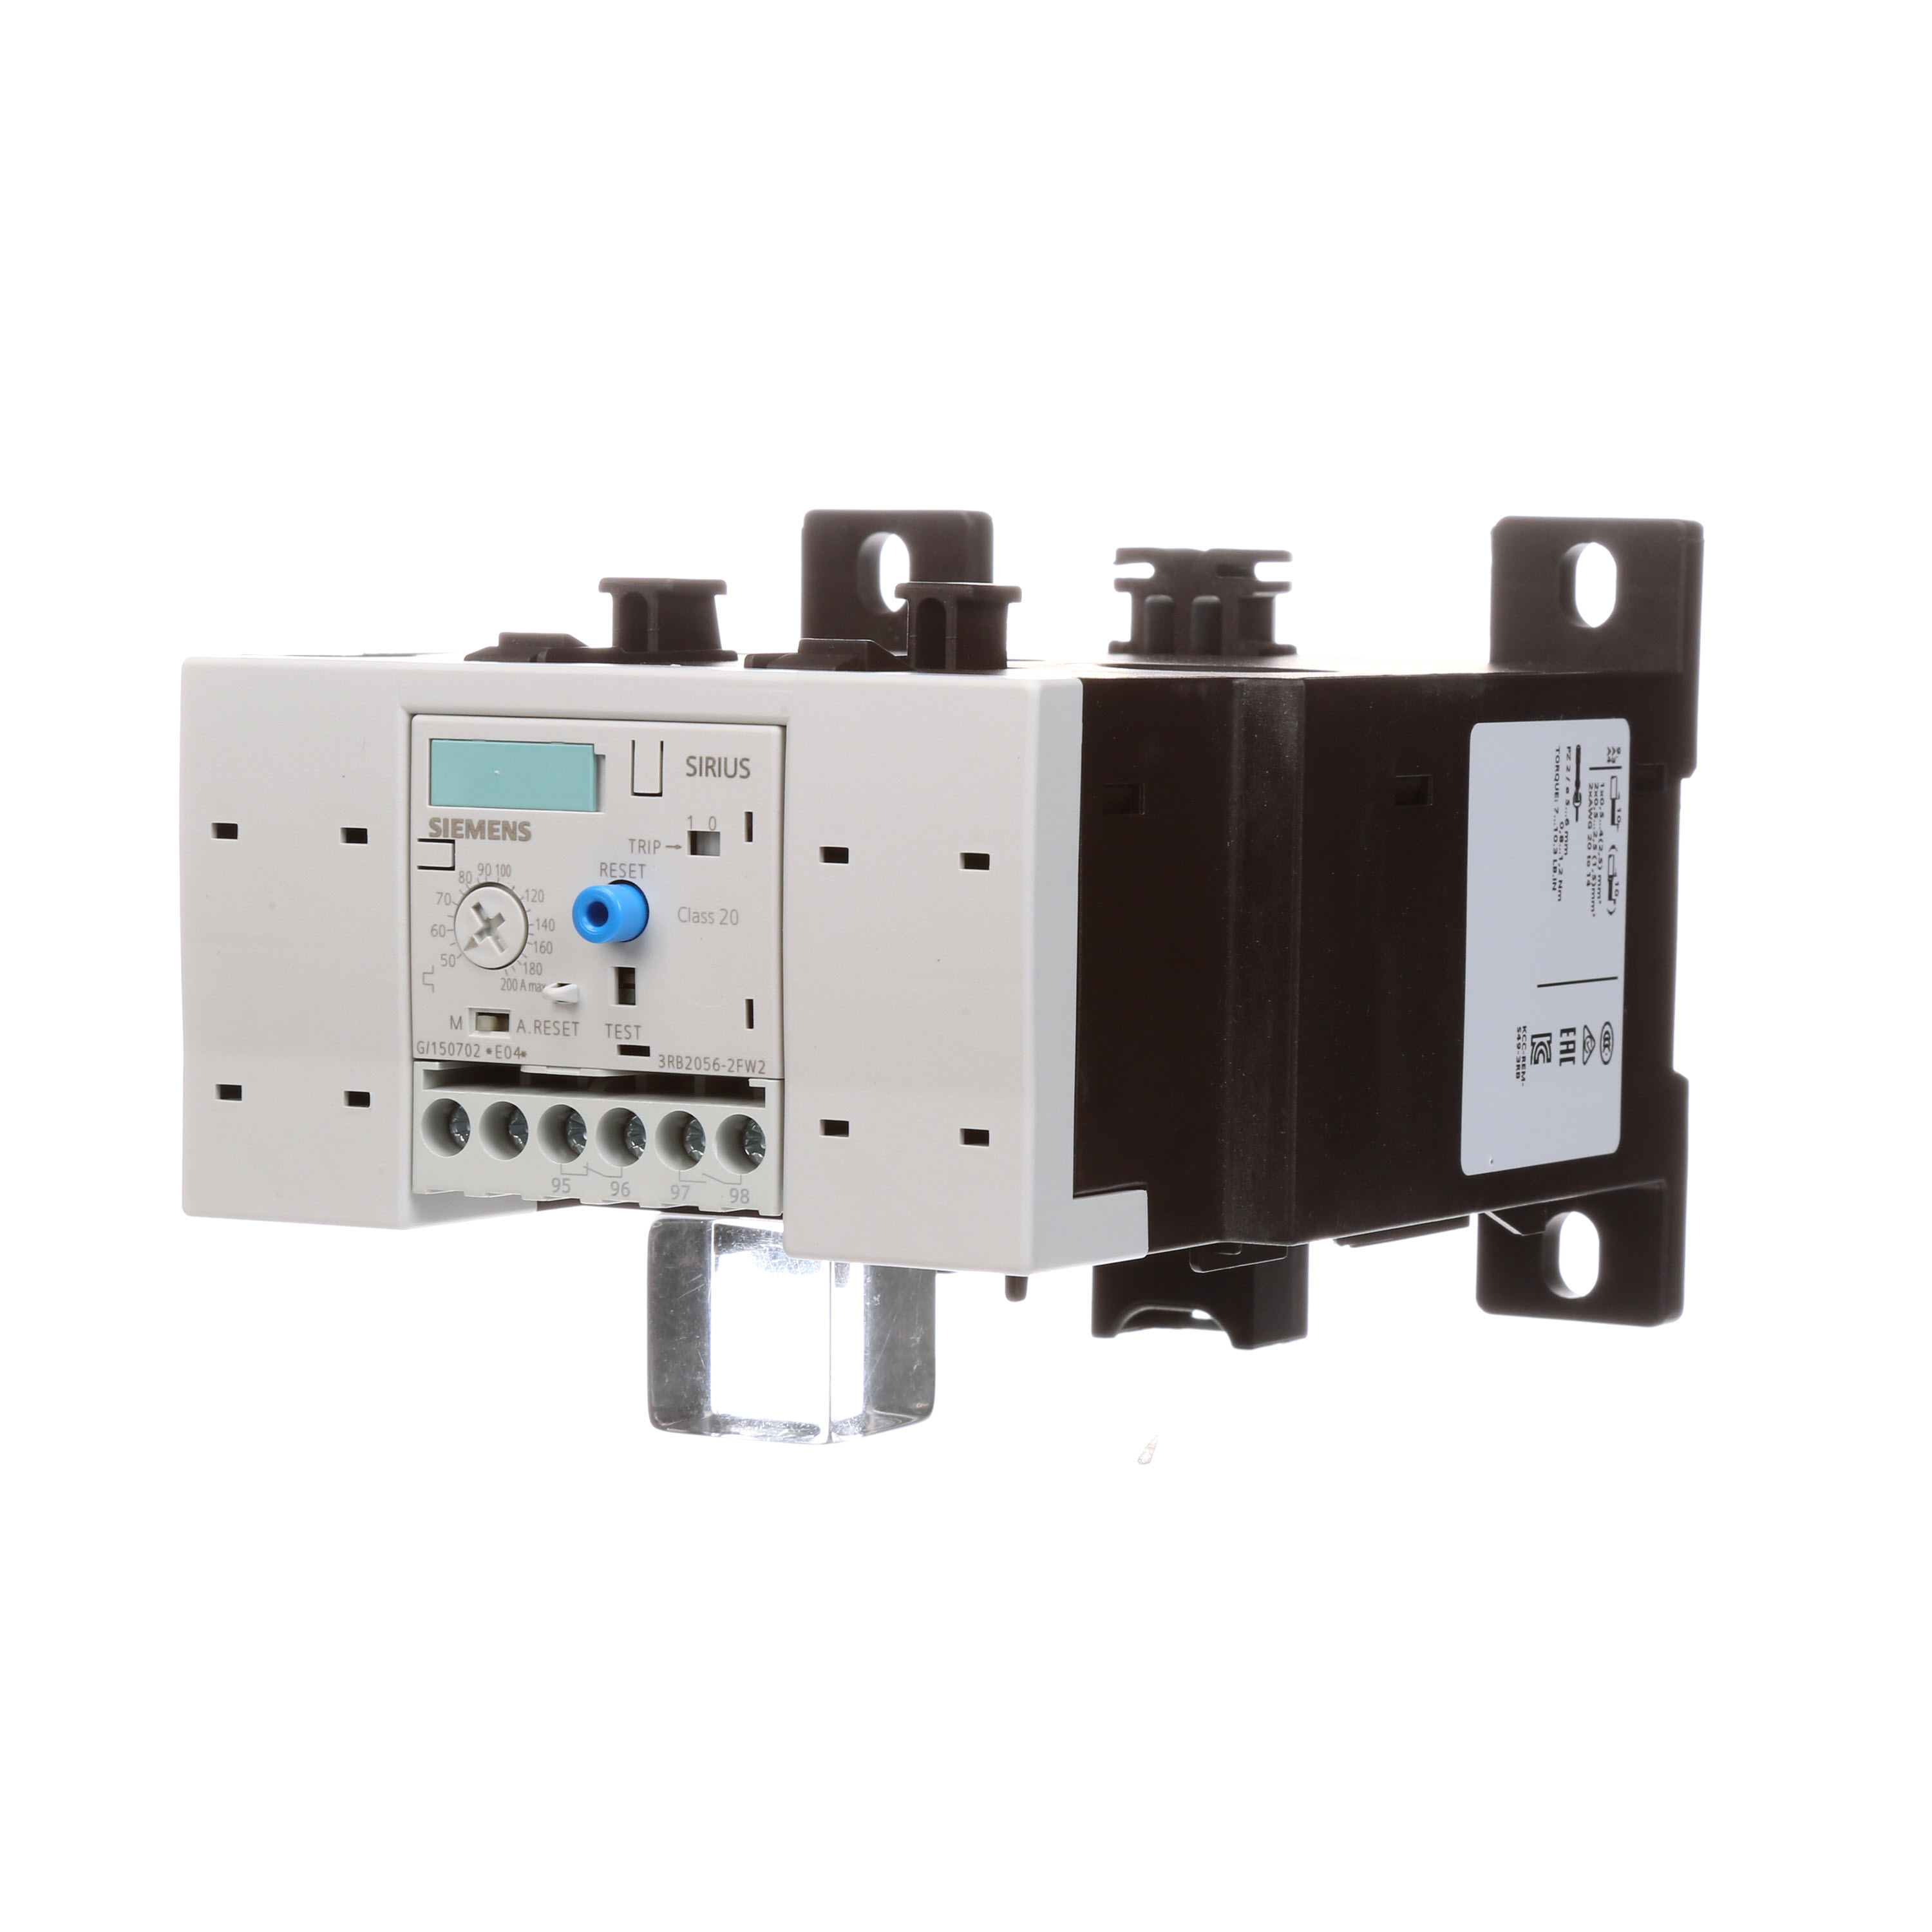 Overload relay 50...200 a for motor protection size s6, class 20 mount. onto cont./ stand-alone main circuit through transf. aux. circuit screw connection manual-automatic-reset